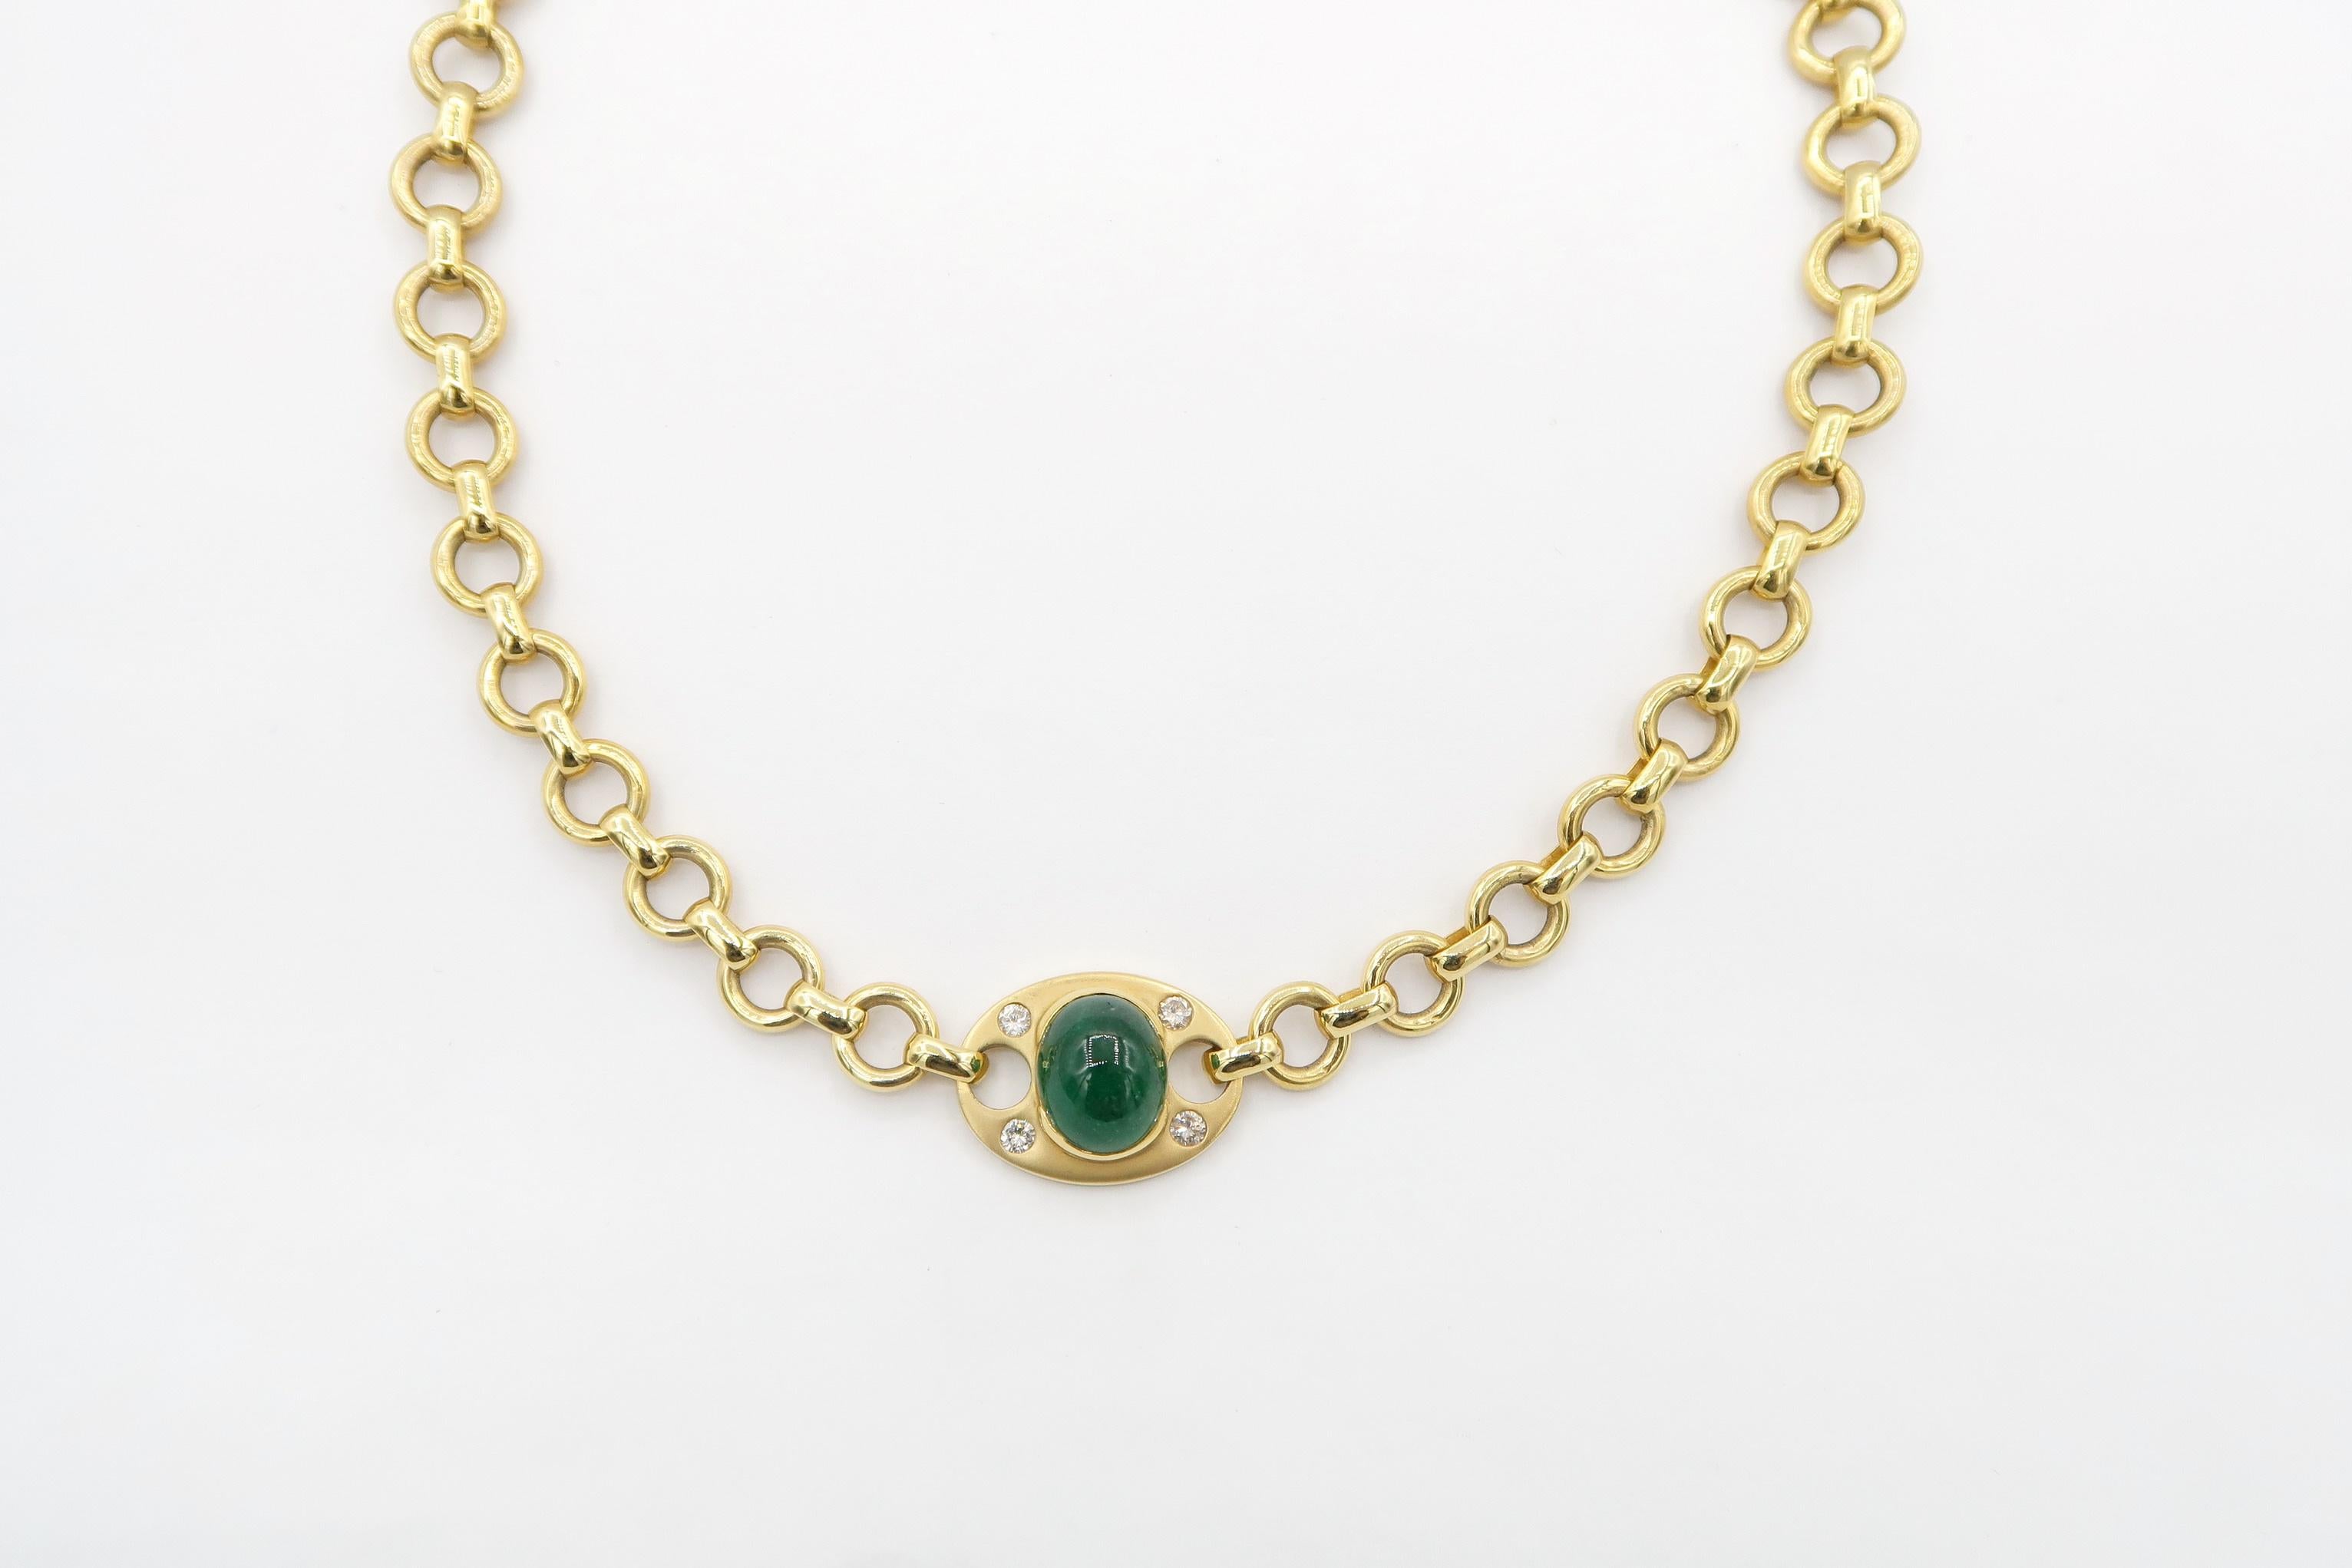 This necklace features 8.79 ct vivid cabochon emerald semi-bezel set in a matte oval 18K yellow gold tag embellished with diamonds. The shiny 18K yellow gold chain is made of 8mm circle round cable links alternating with flat oval links. The